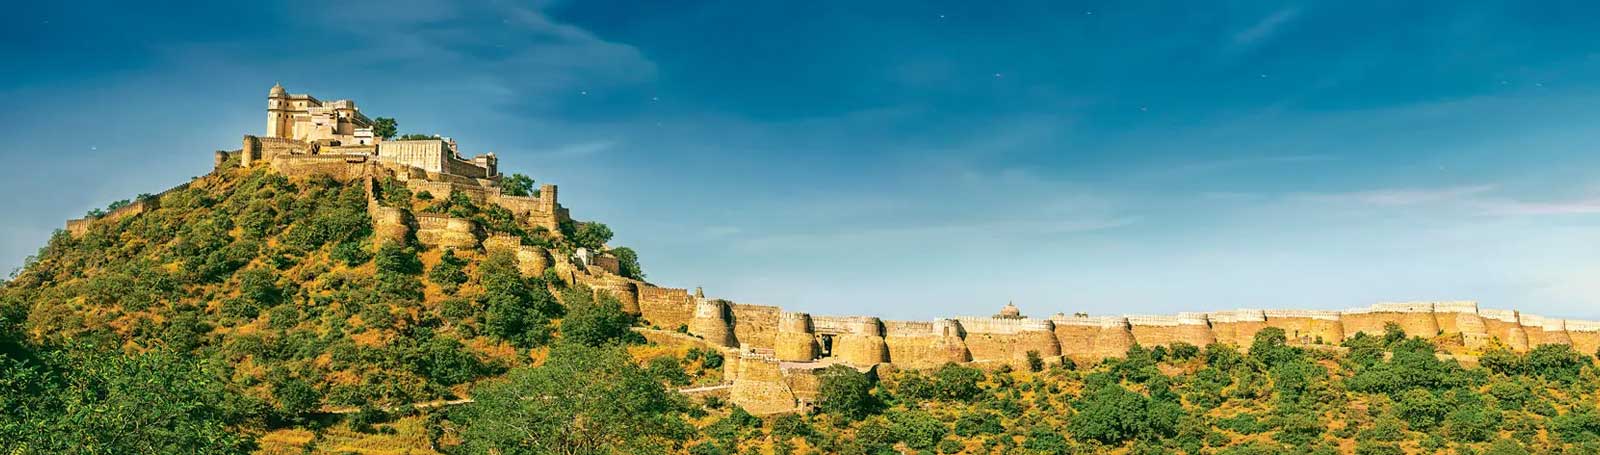 Rajasthan Tour with Forts & Palace